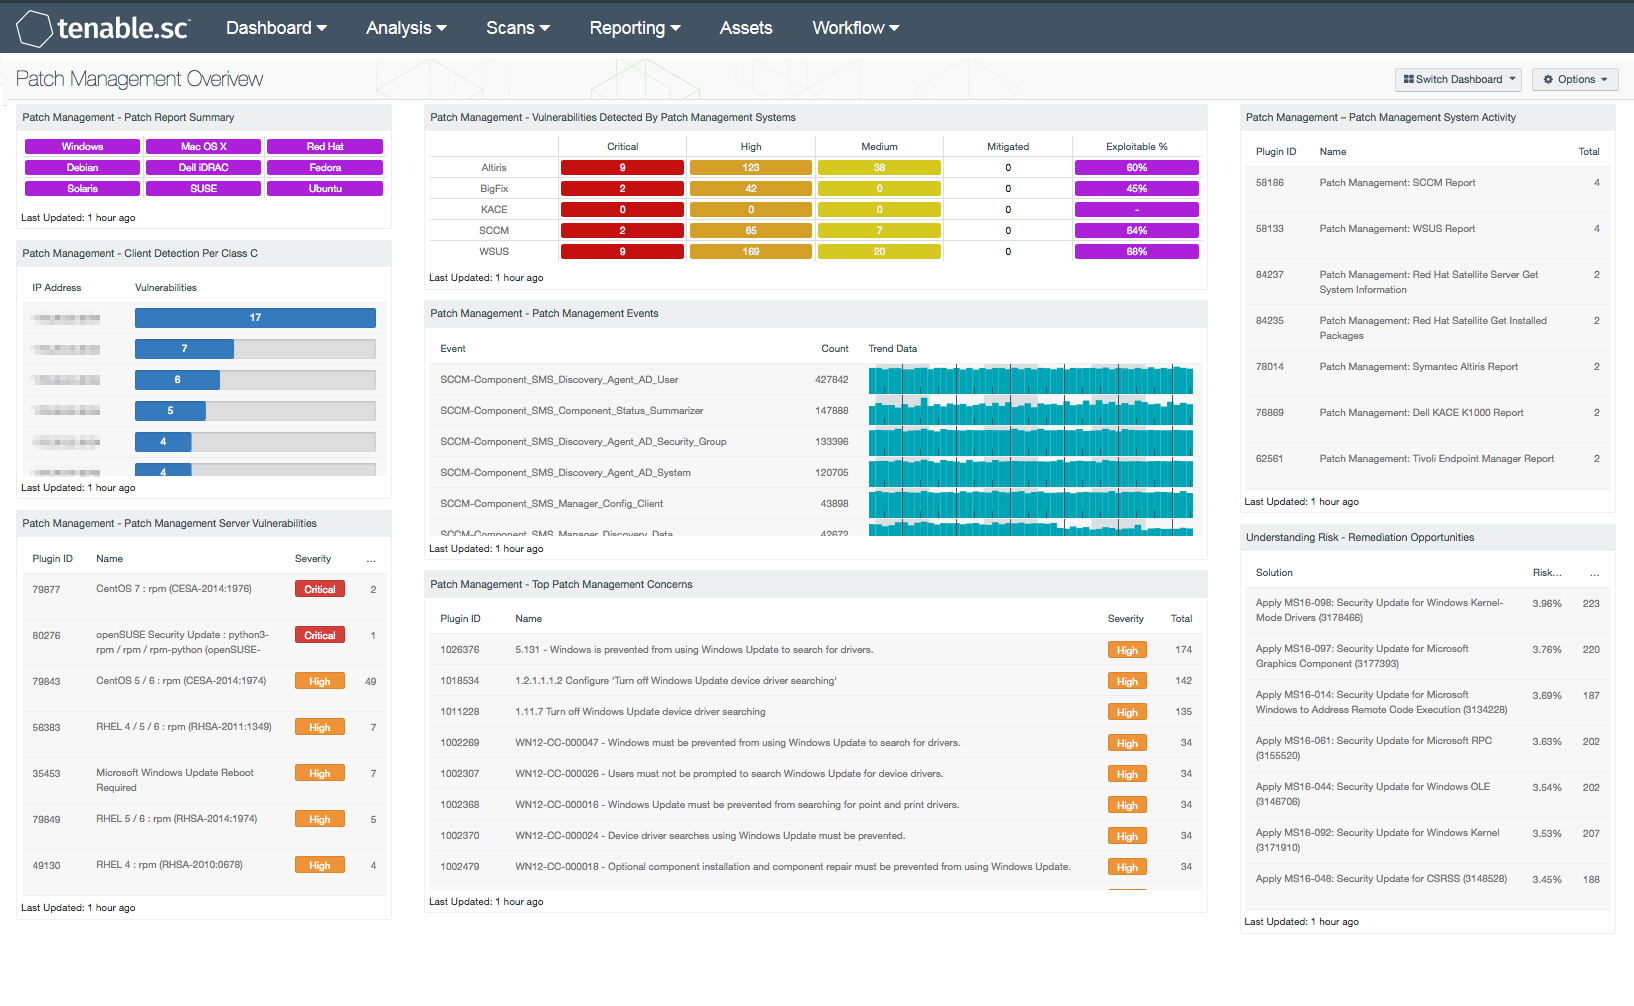 Patch Management Overview - SC Dashboard | Tenable®